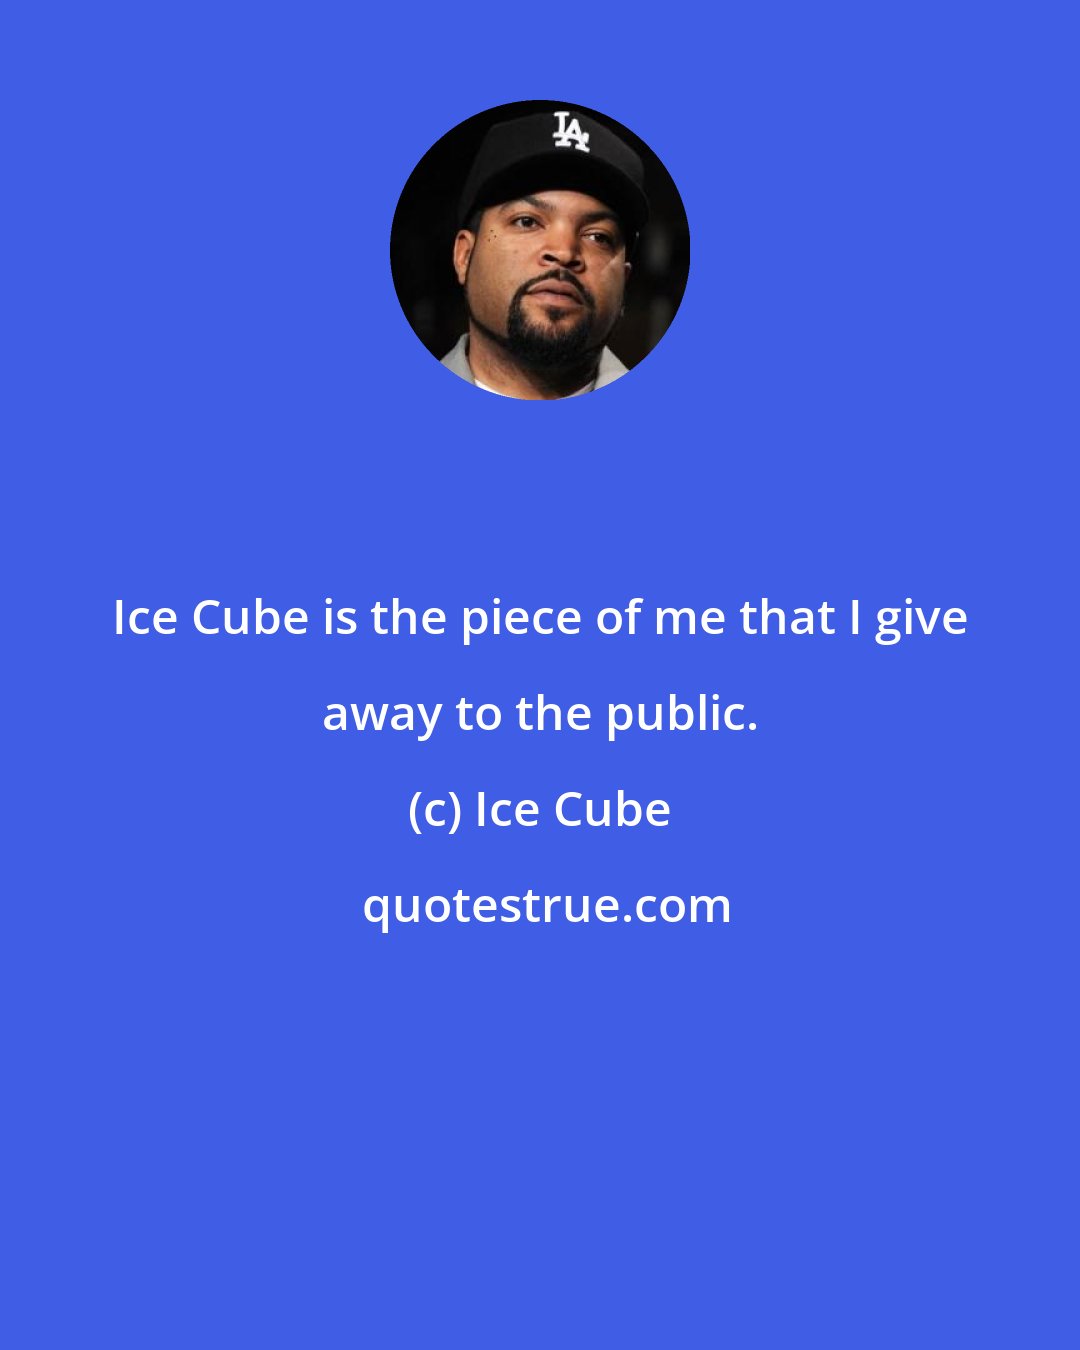 Ice Cube: Ice Cube is the piece of me that I give away to the public.